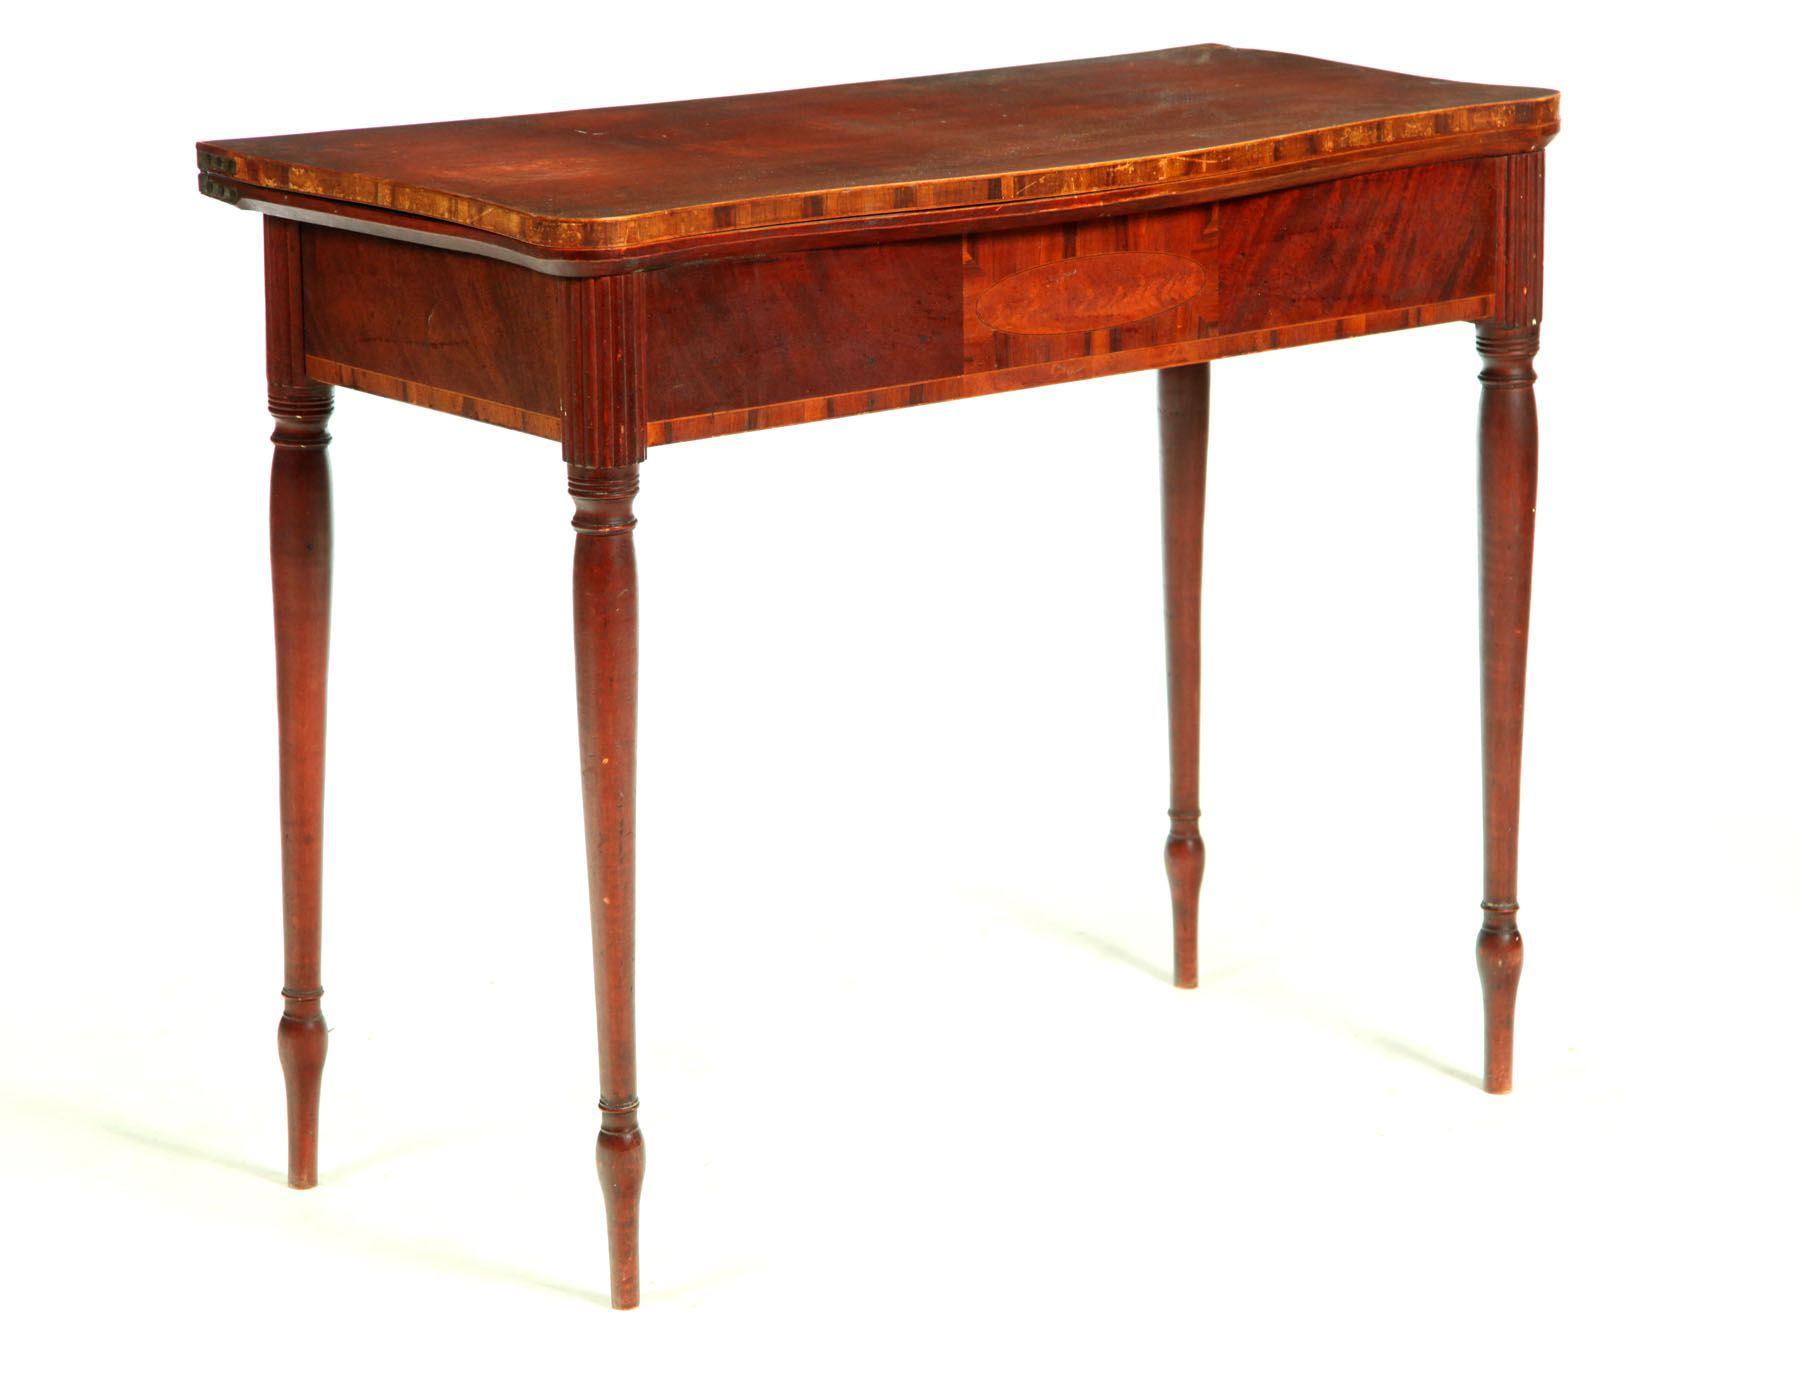 SHERATON CARD TABLE Attributed 117032